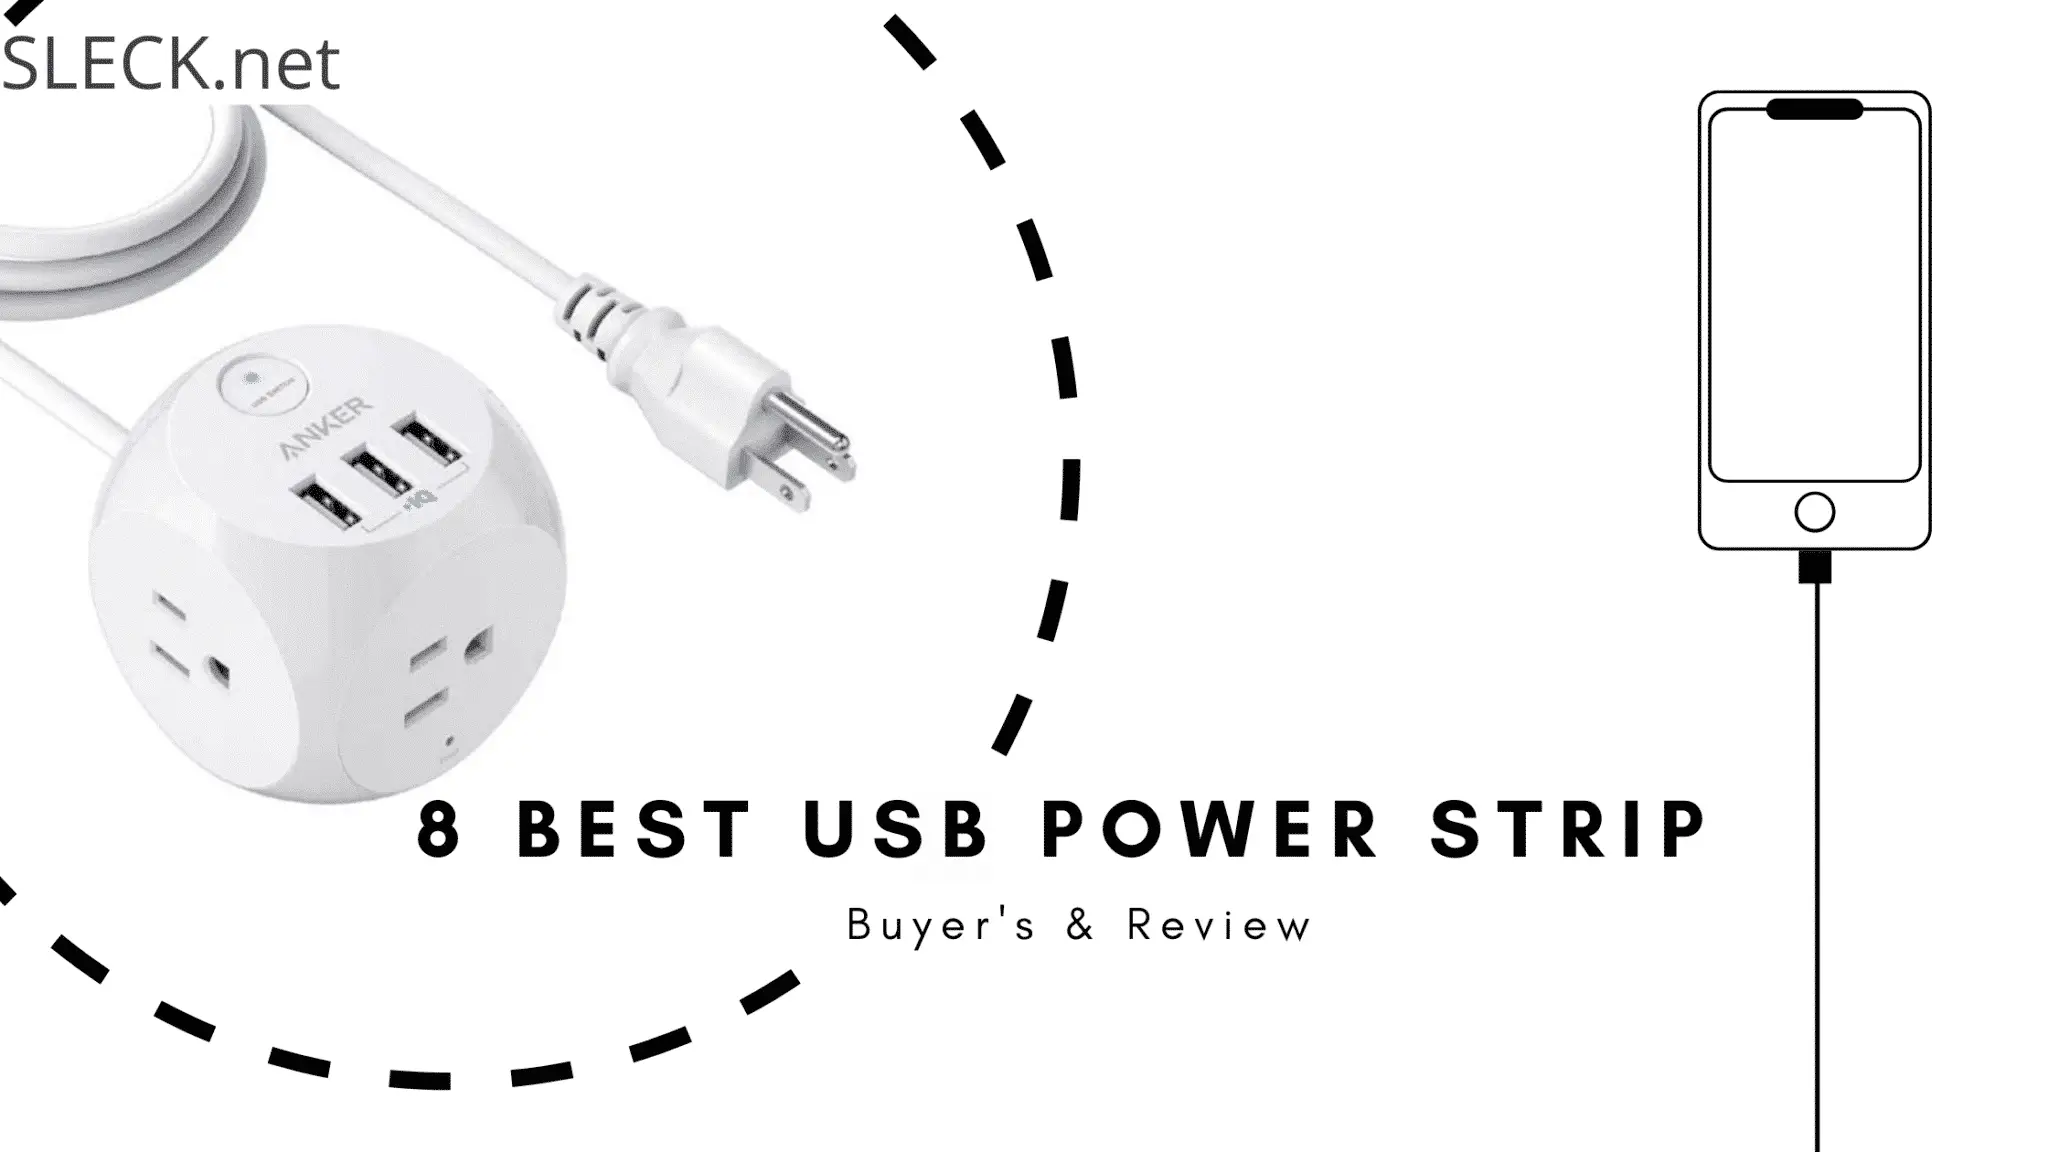 8 best USB Power Strip | Buyer’s Guide & Review